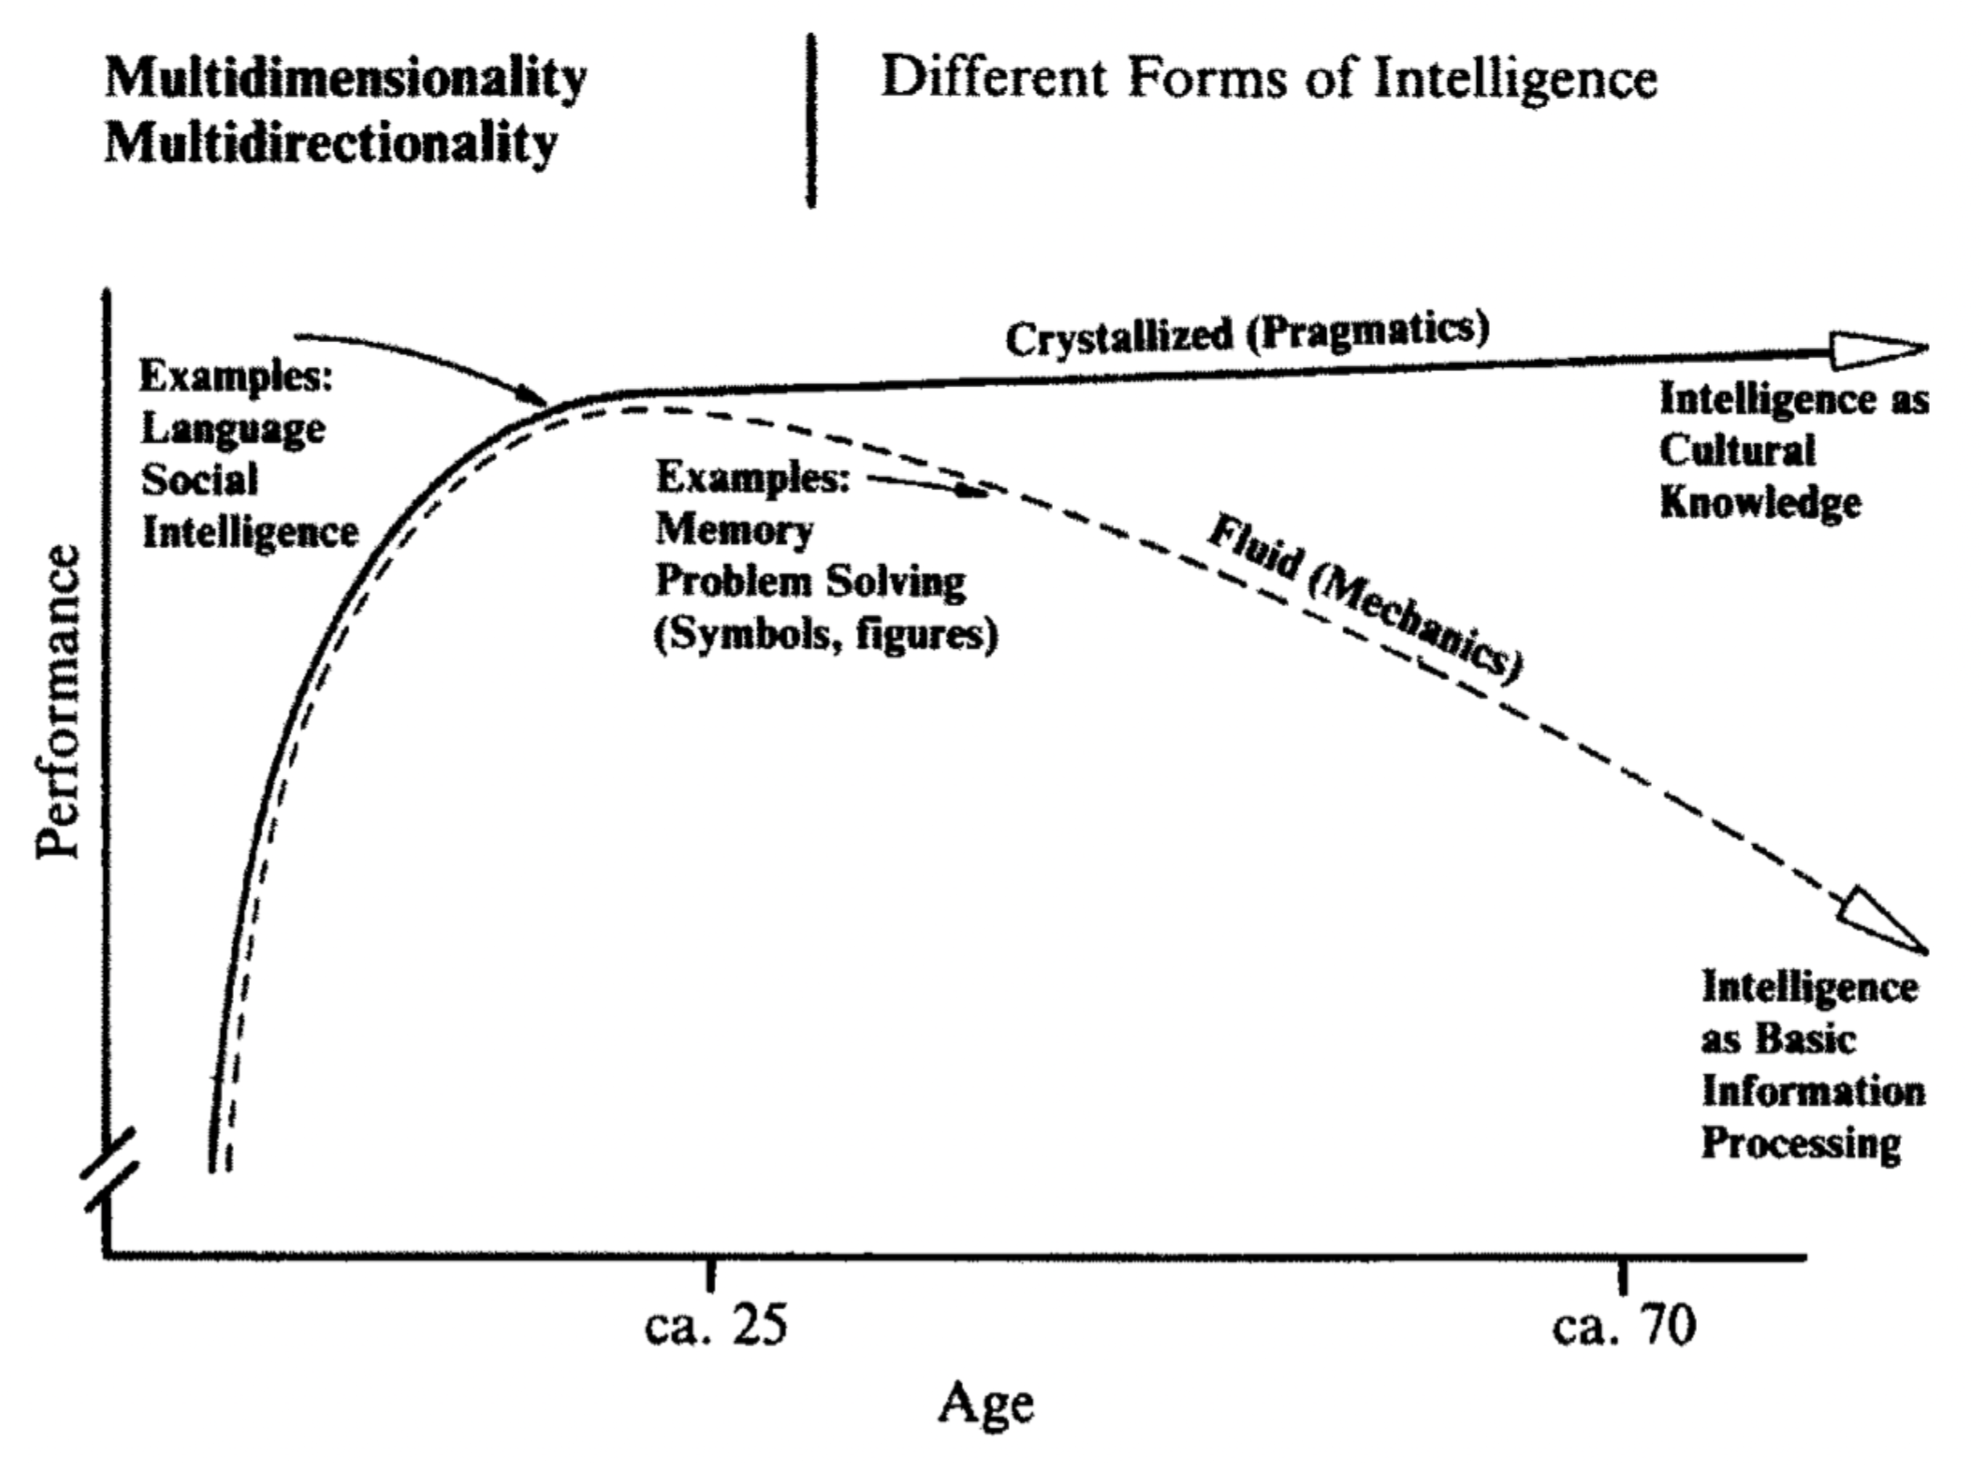 Baltes' developmental theory is explained in this trajectory of intelligence which demonstrates for developmental psychology progresses